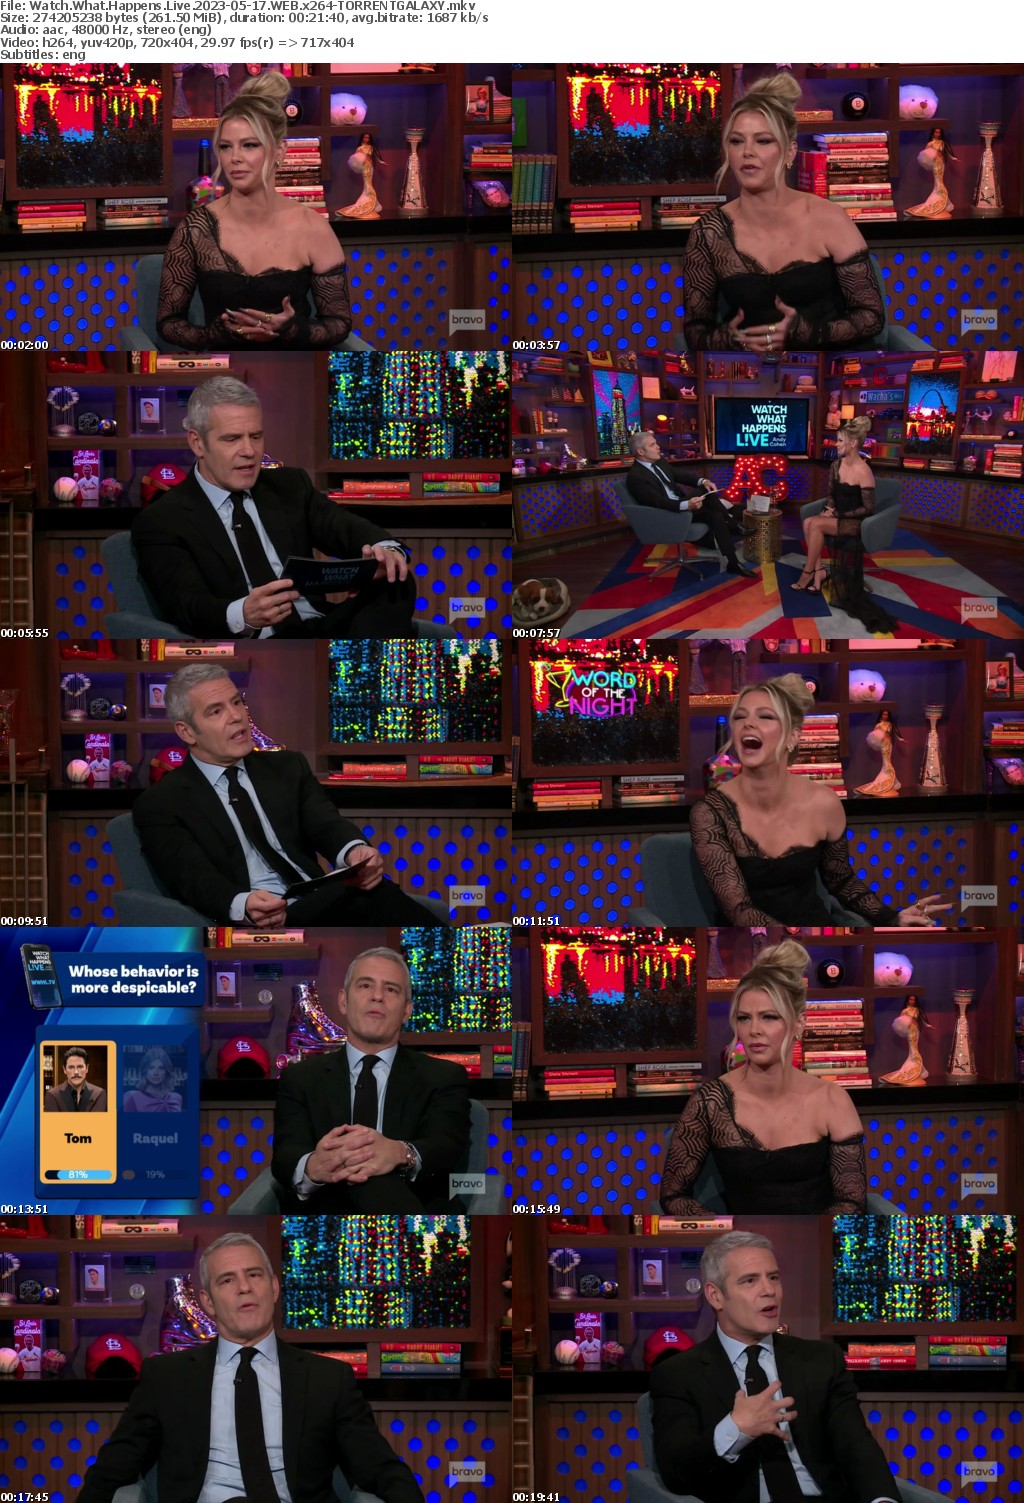 Watch What Happens Live 2023-05-17 WEB x264-GALAXY